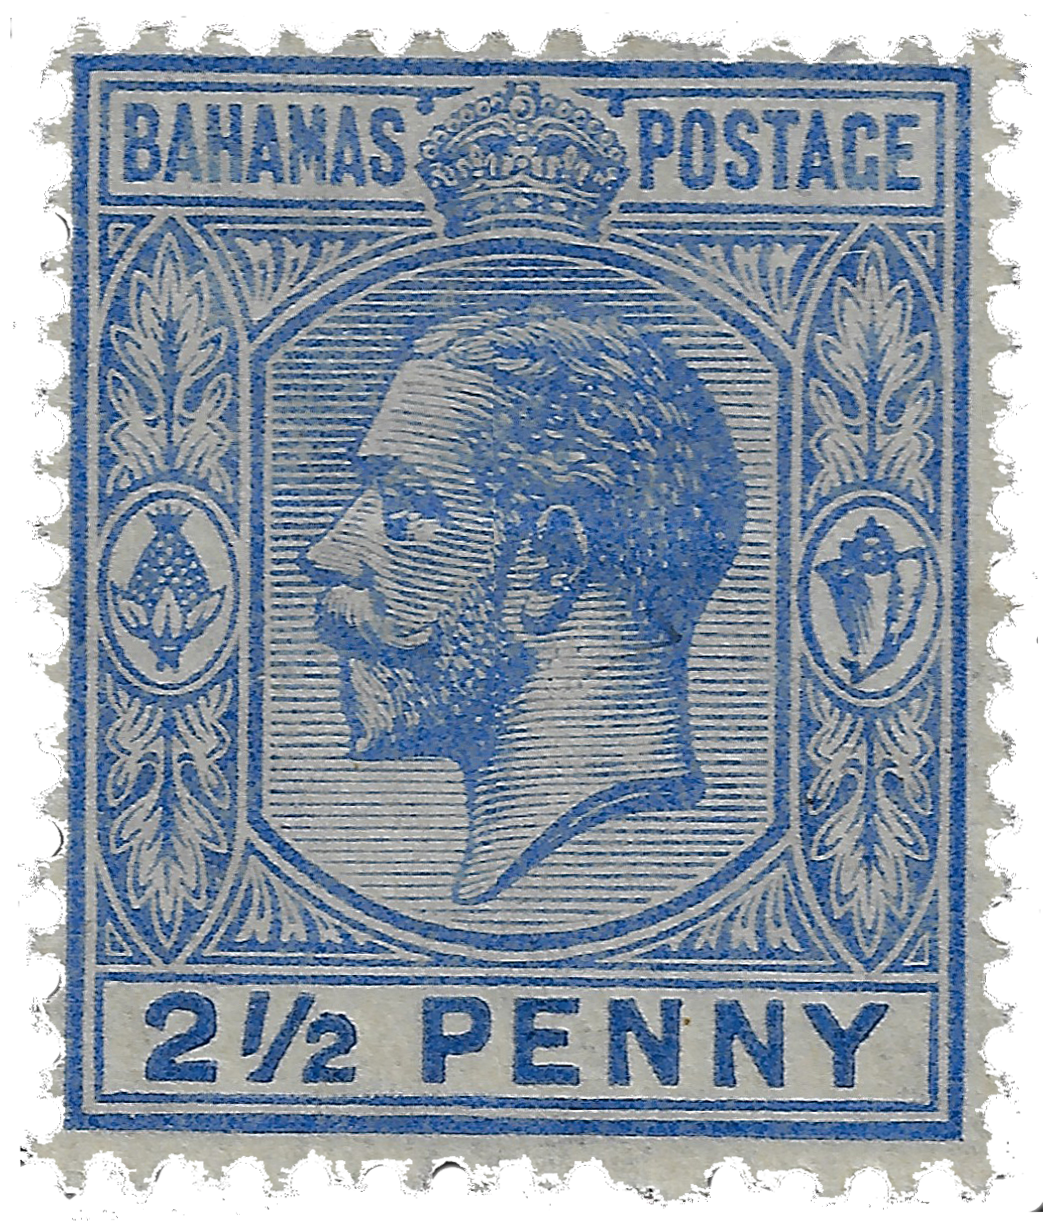 2.5c 1912-1919, King George V Issue